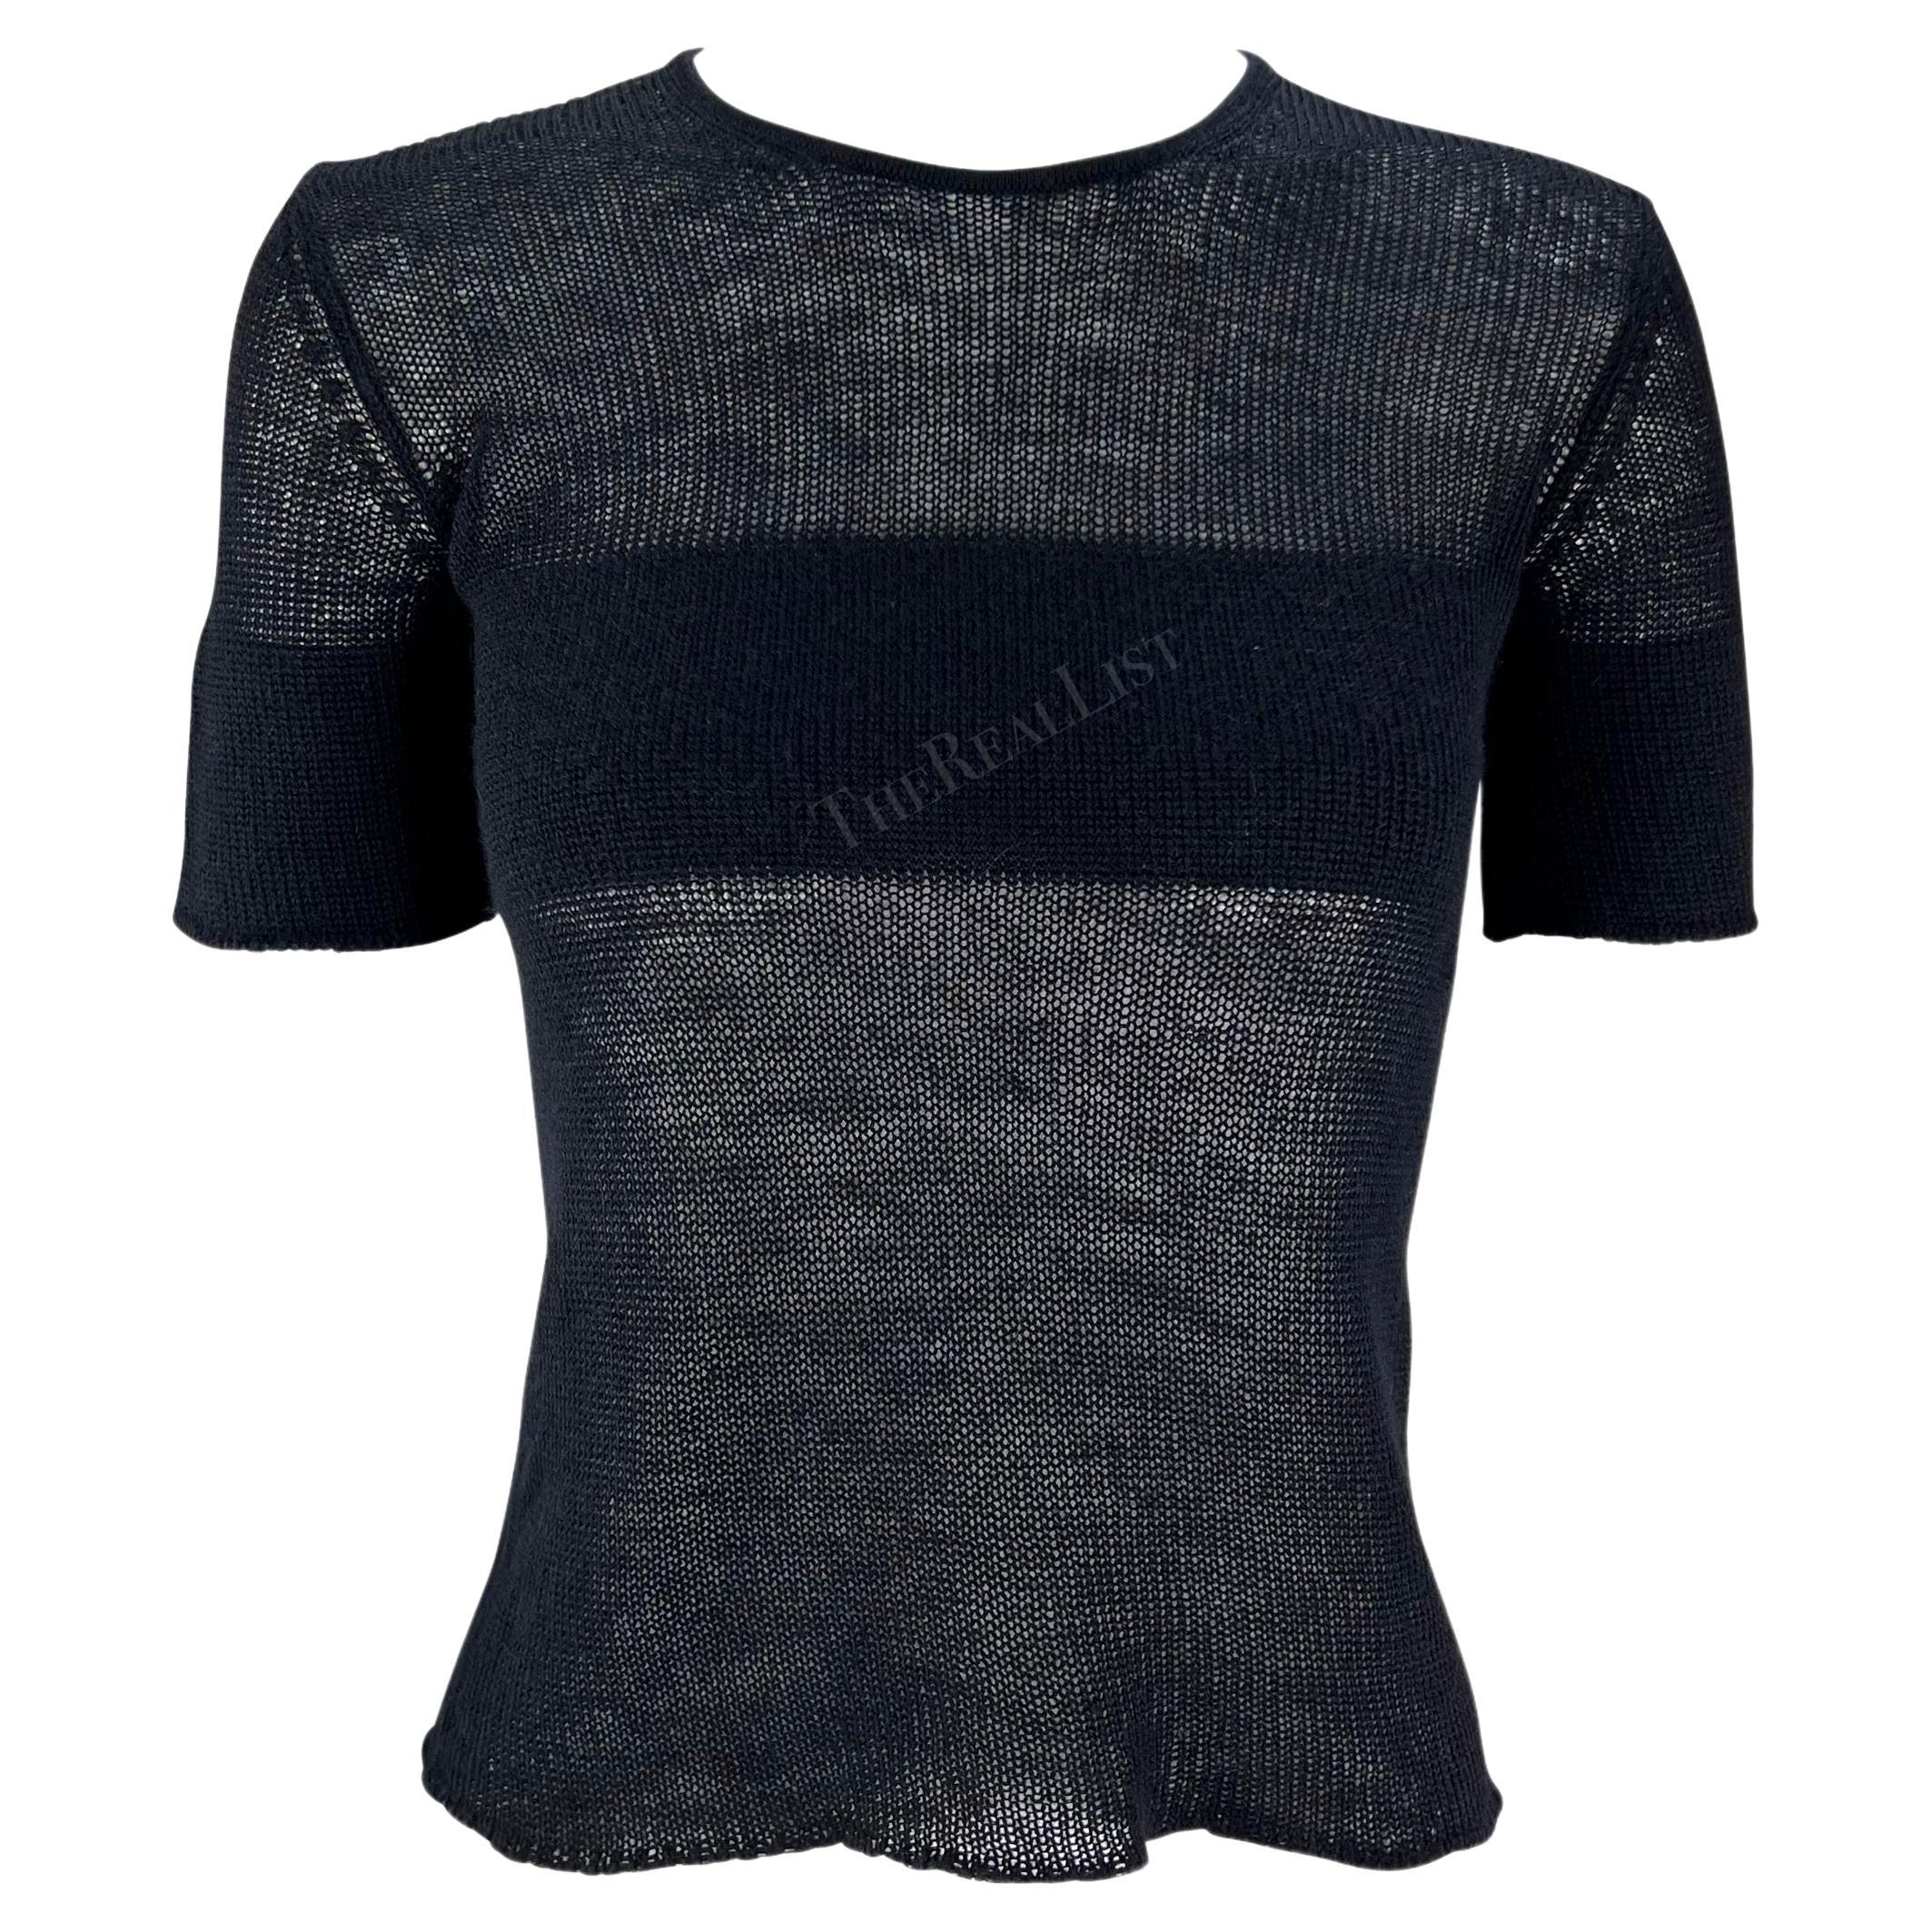 1990s Giorgio Armani Sheer Black Knit Cashmere Sweater Short Sleeve Top For Sale